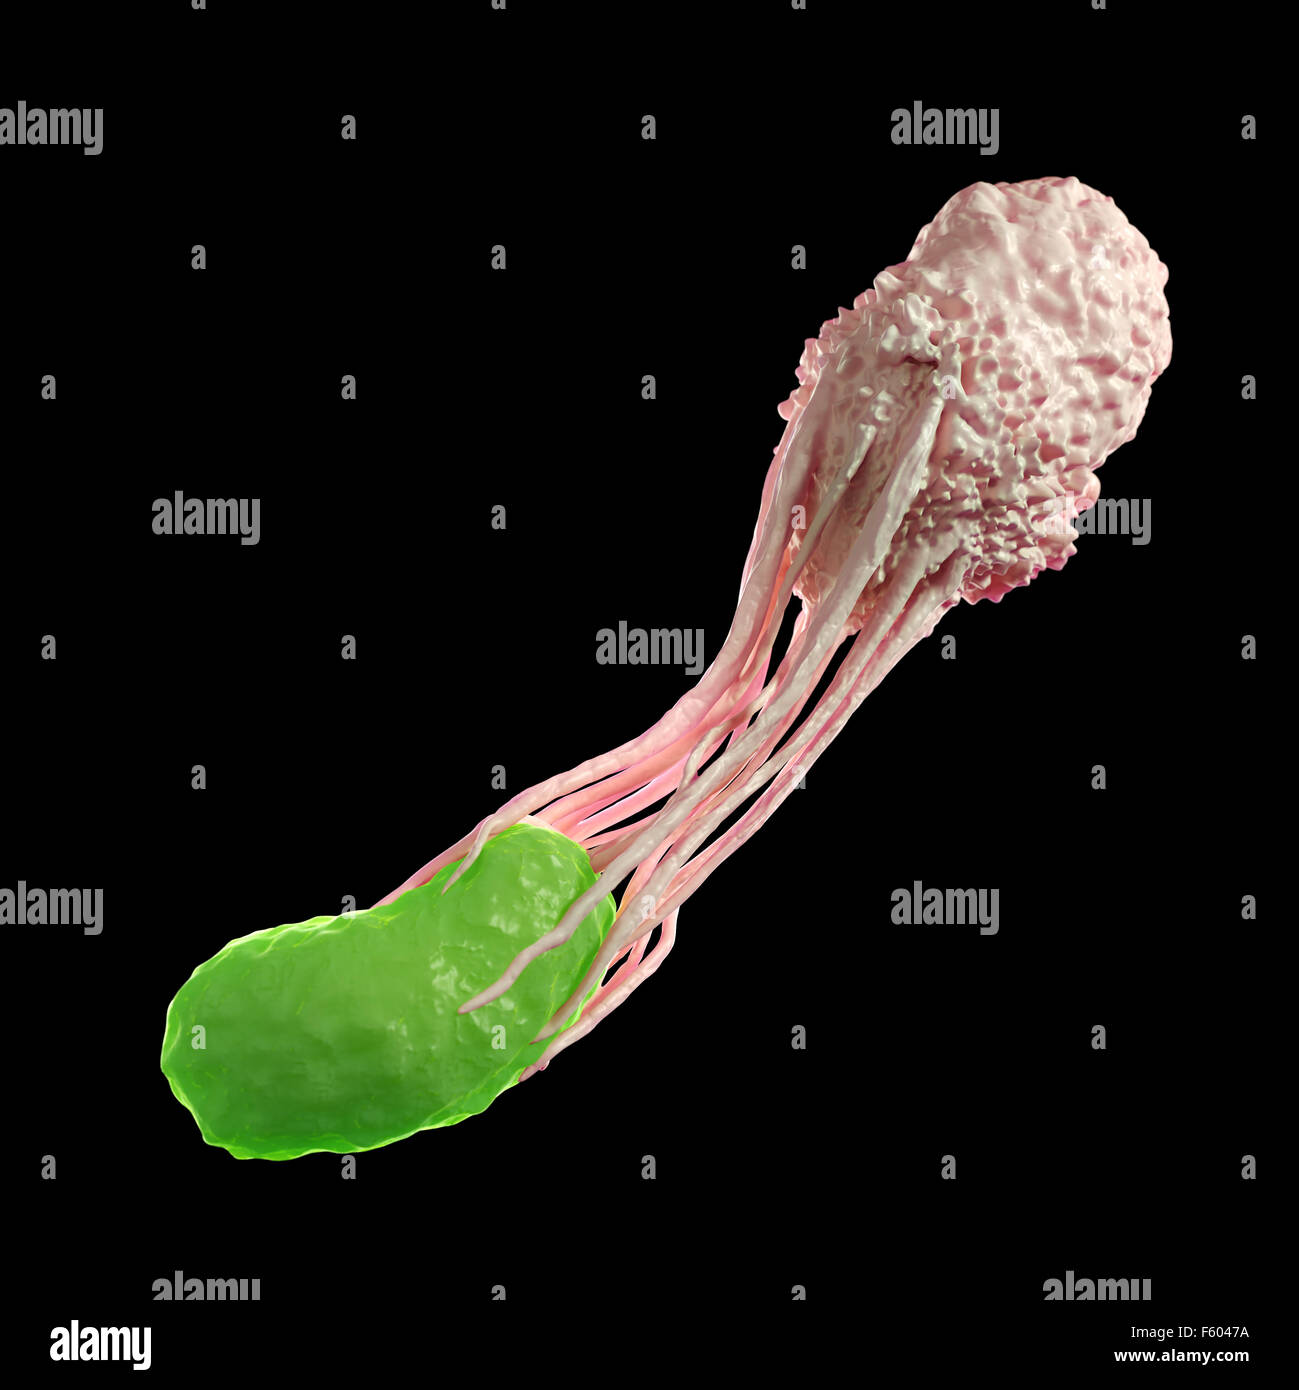 medically accurate illustration of a white blood cell engulfing a bacteria Stock Photo